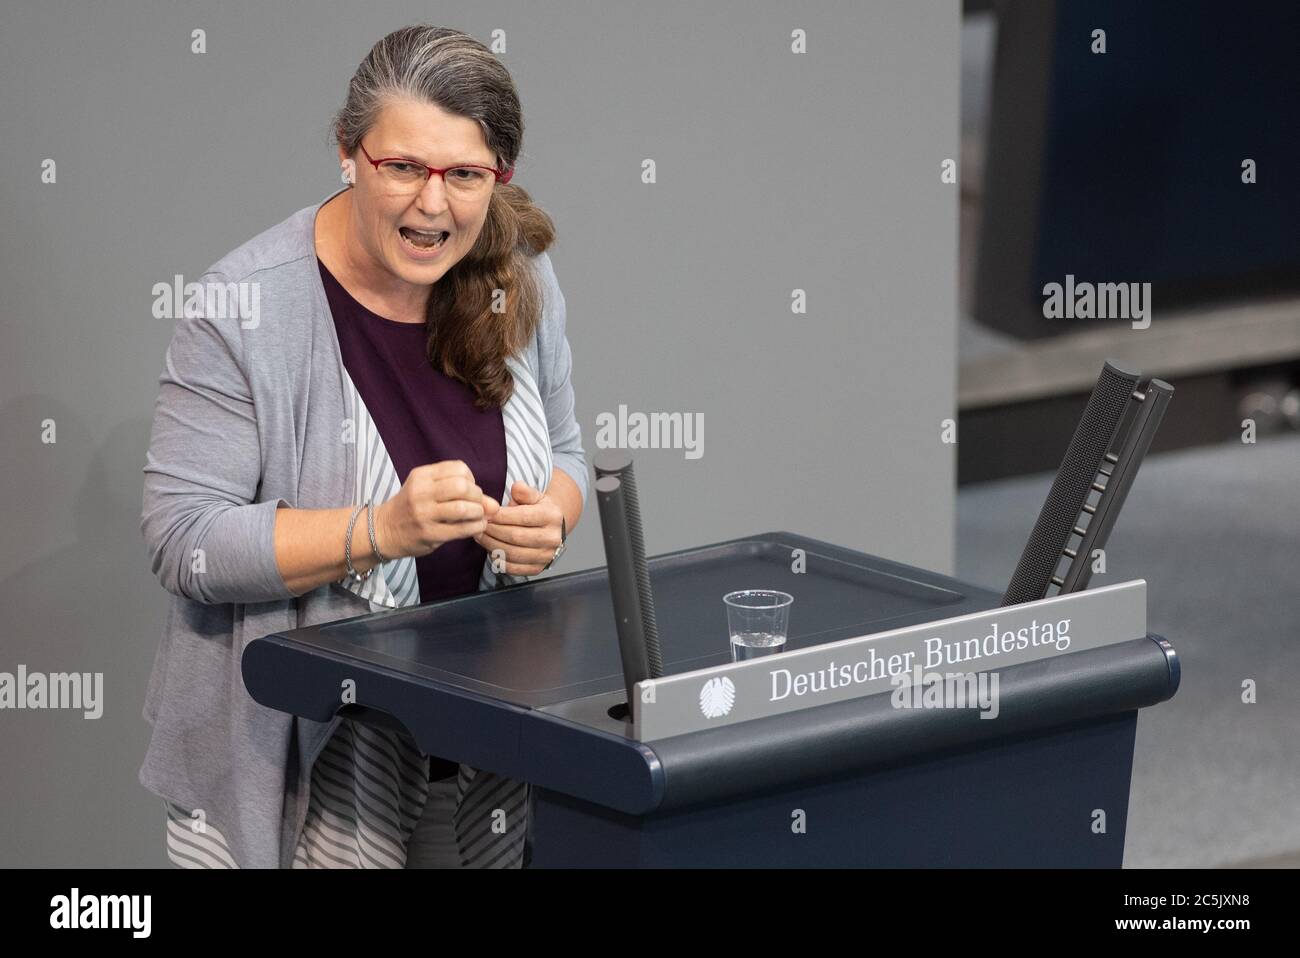 Berlin, Germany. 03rd July, 2020. Ute Vogt (SPD) speaks in the plenary session of the German Bundestag. The main topics of the 171st session of the 19th legislative period are the adoption of the Coal Exit Act, a topical hour on the excesses of violence in Stuttgart, as well as debates on electoral law reform, the protection of electronic patient data, the welfare of farm animals and the German chairmanship of the UN Security Council. Credit: Christophe Gateau/dpa/Alamy Live News Stock Photo